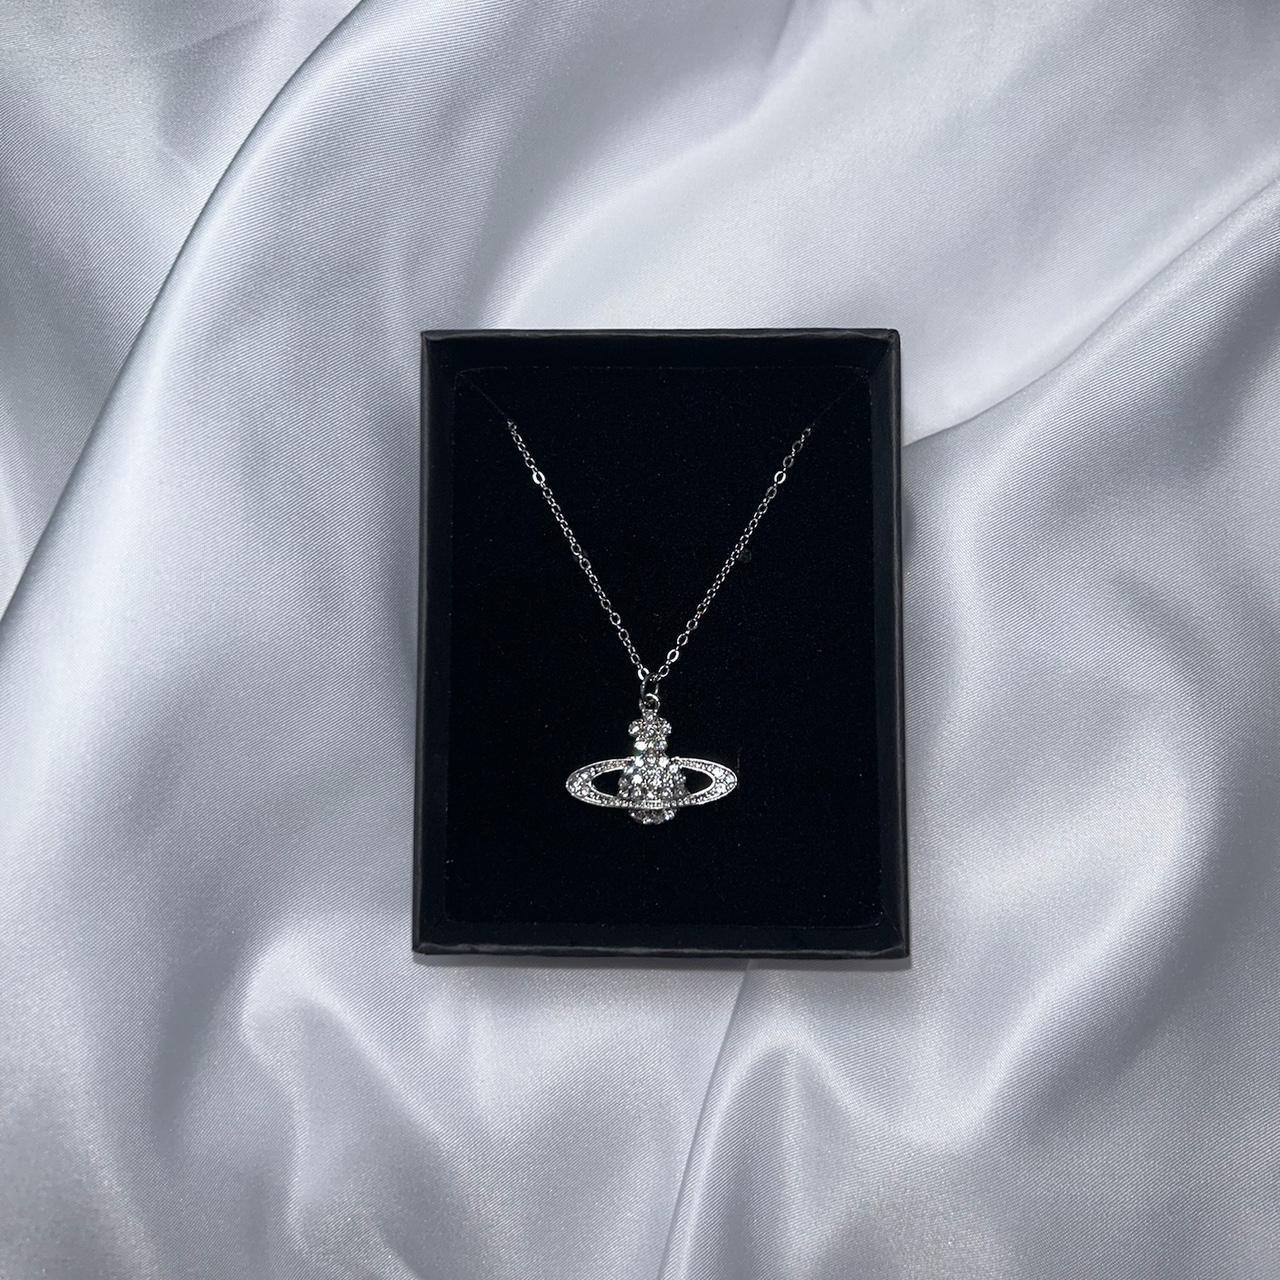 ‘Ora’ Orb Necklace - Silver Available as a set with... - Depop